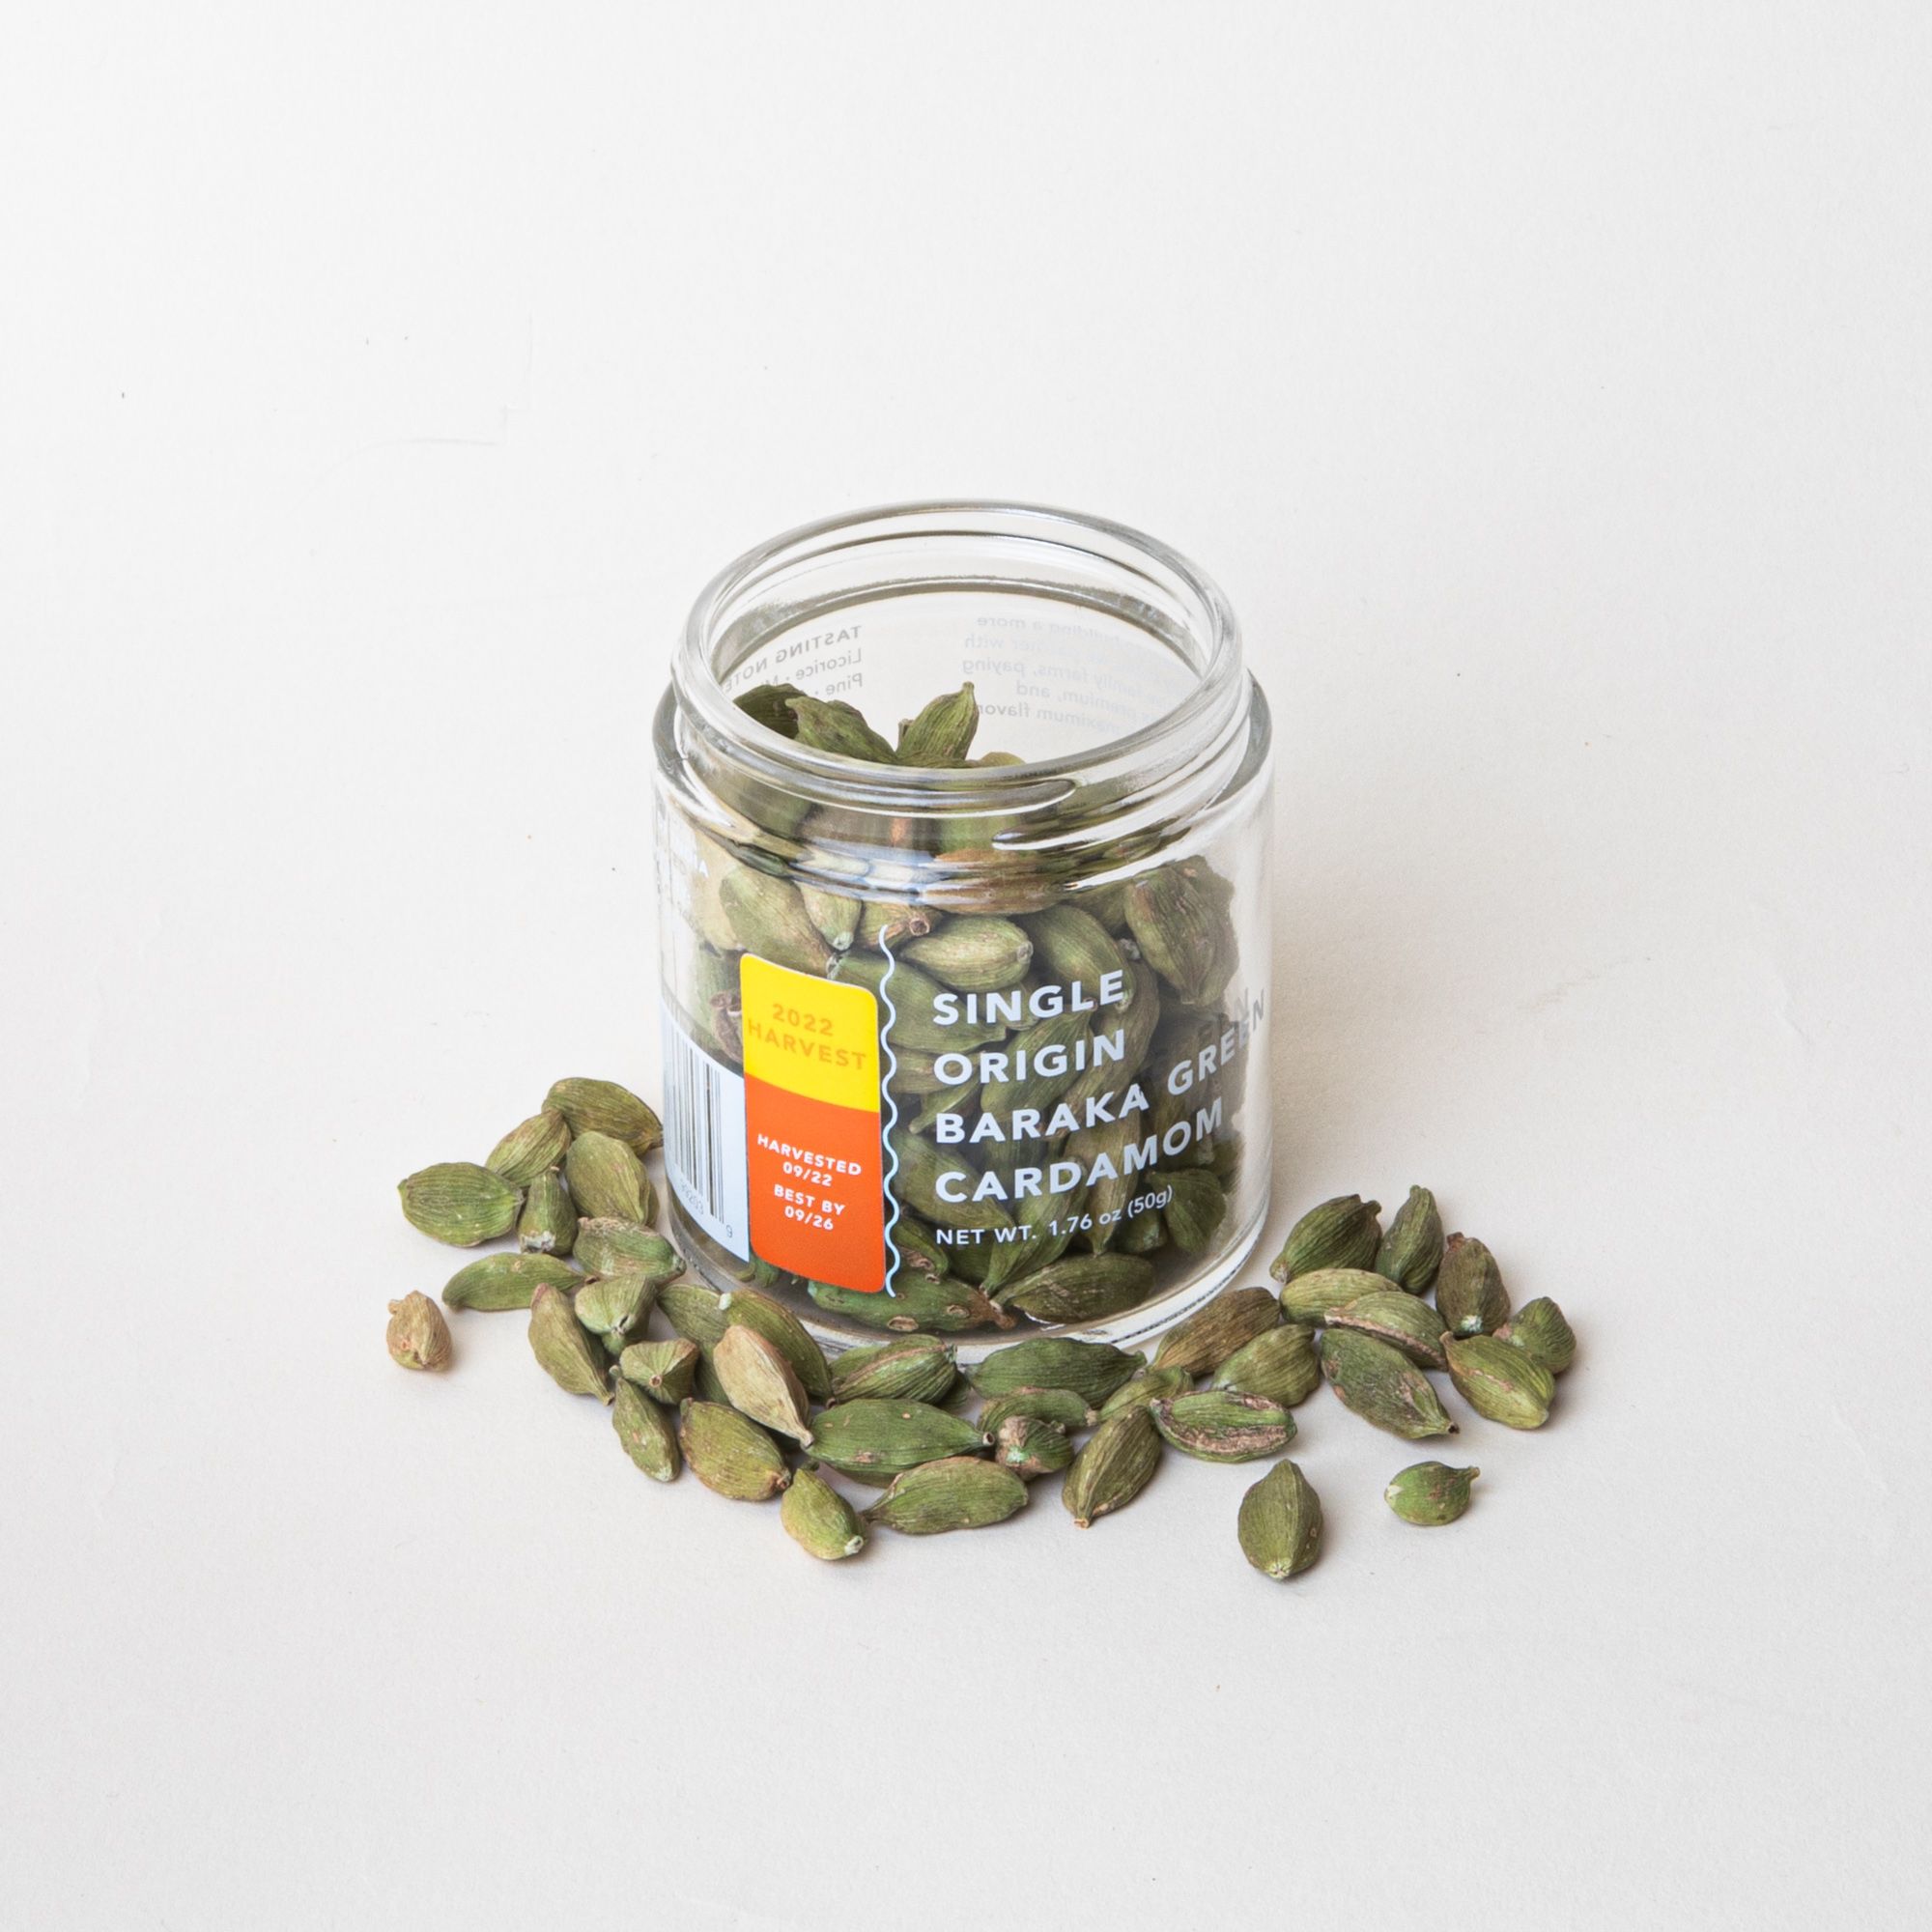 Open glass jar filled and surrounded with whole cardamom and a transparent label that reads "Single Origin Baraka Green Cardamom"